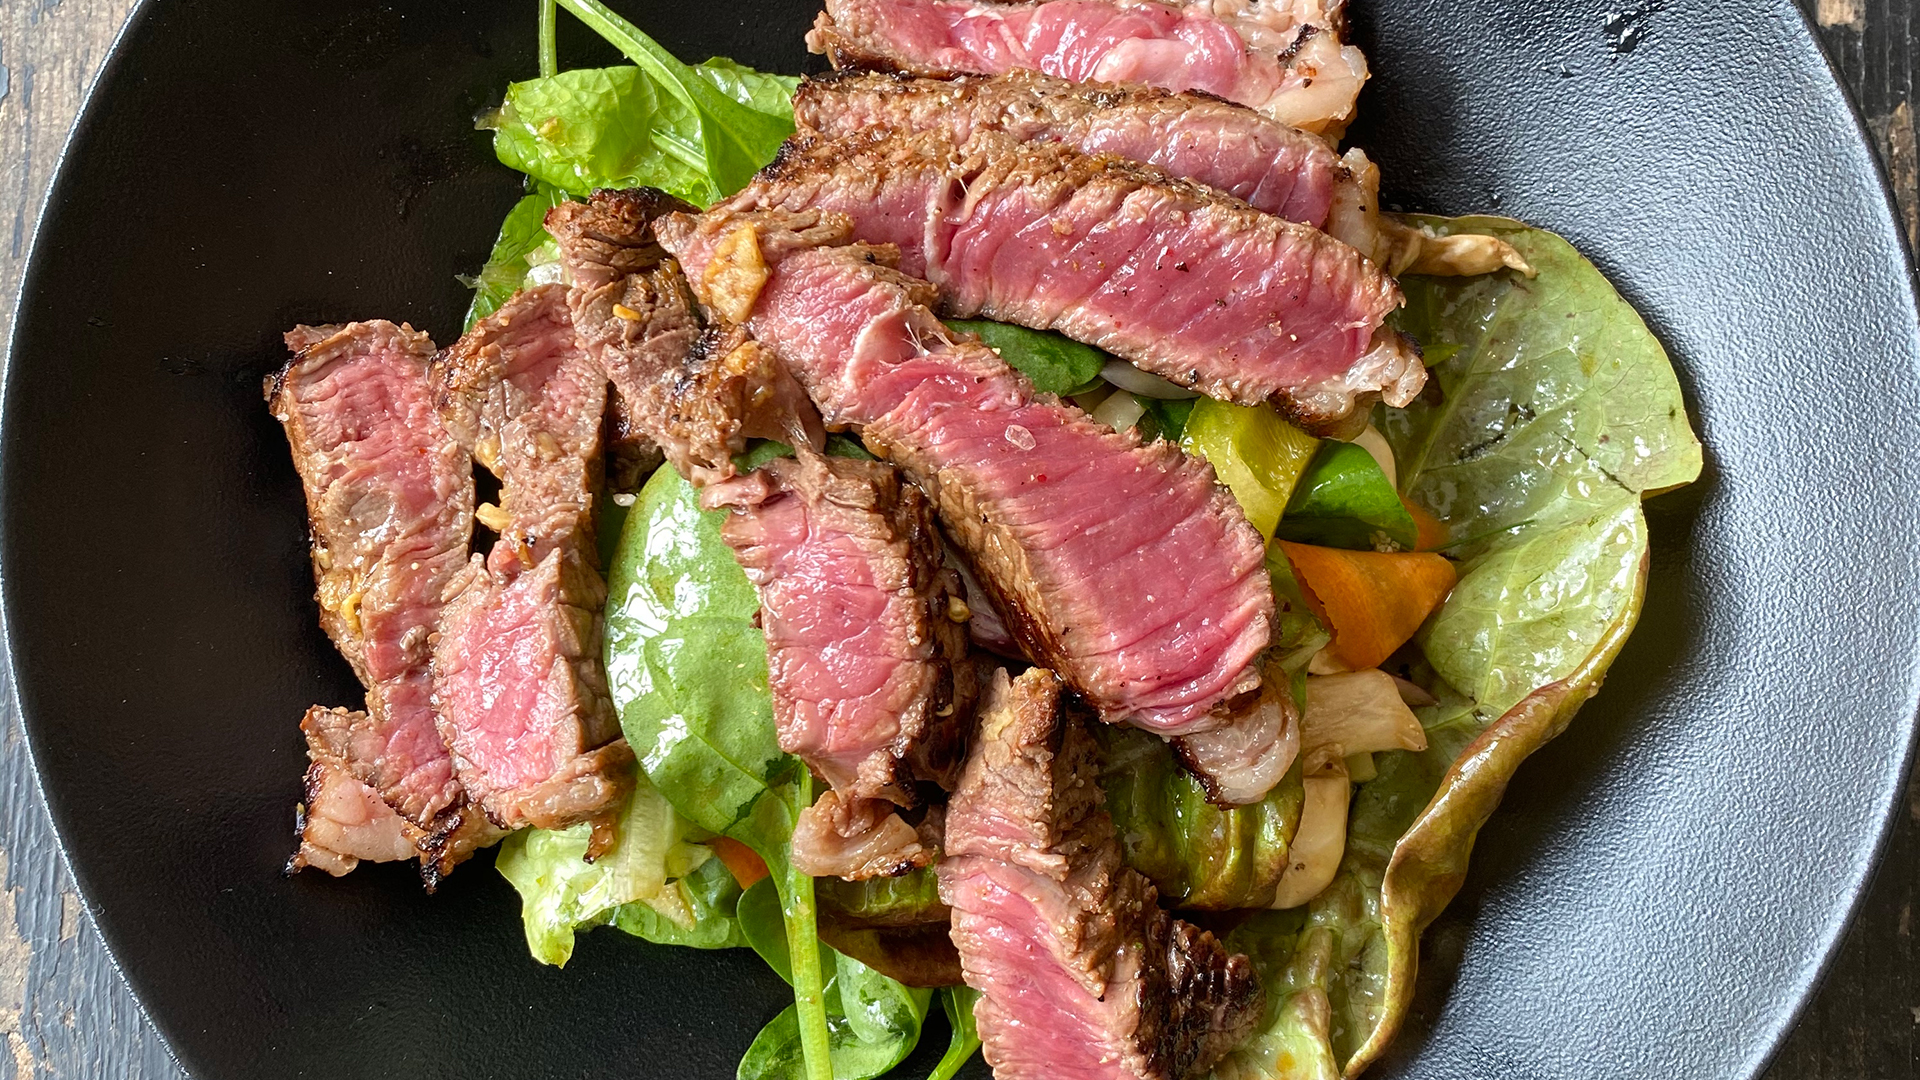 Seared beef and new onions salad